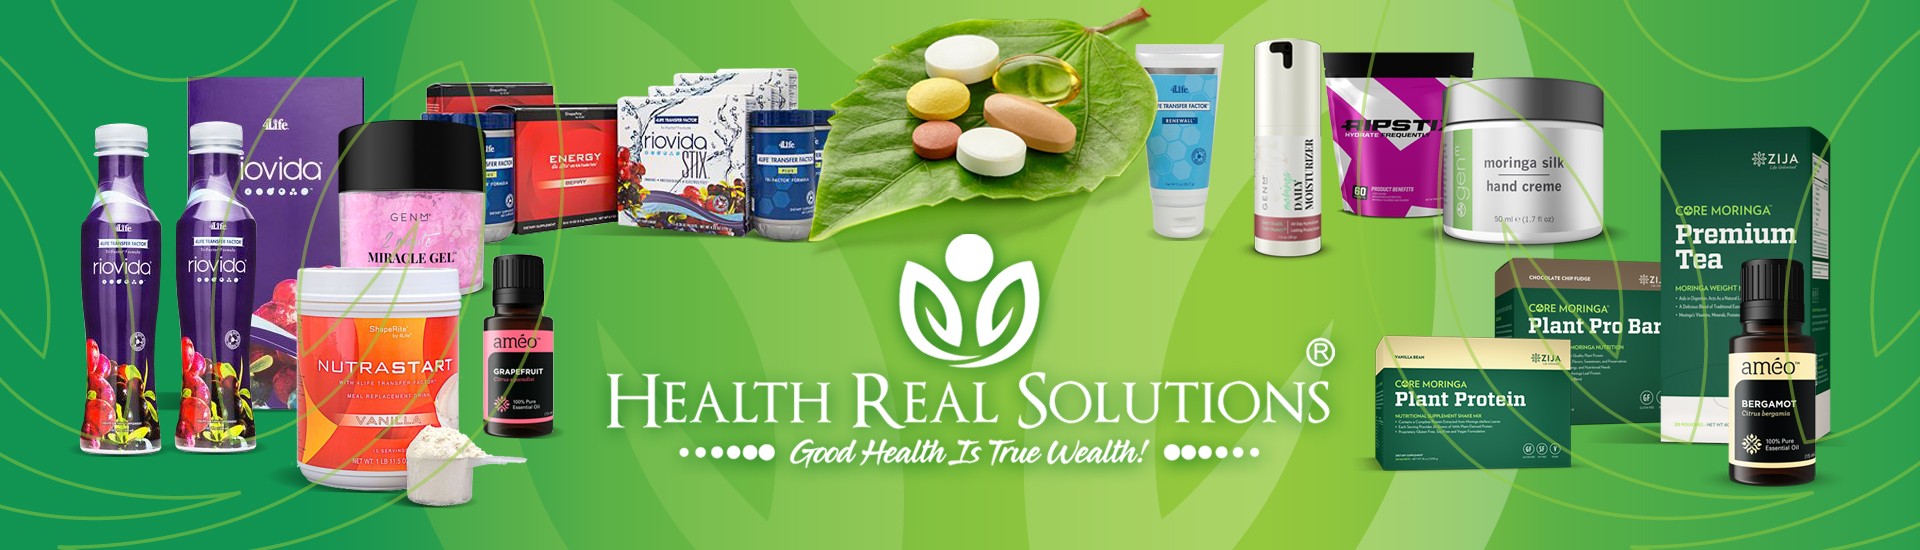 Health Real Solutions